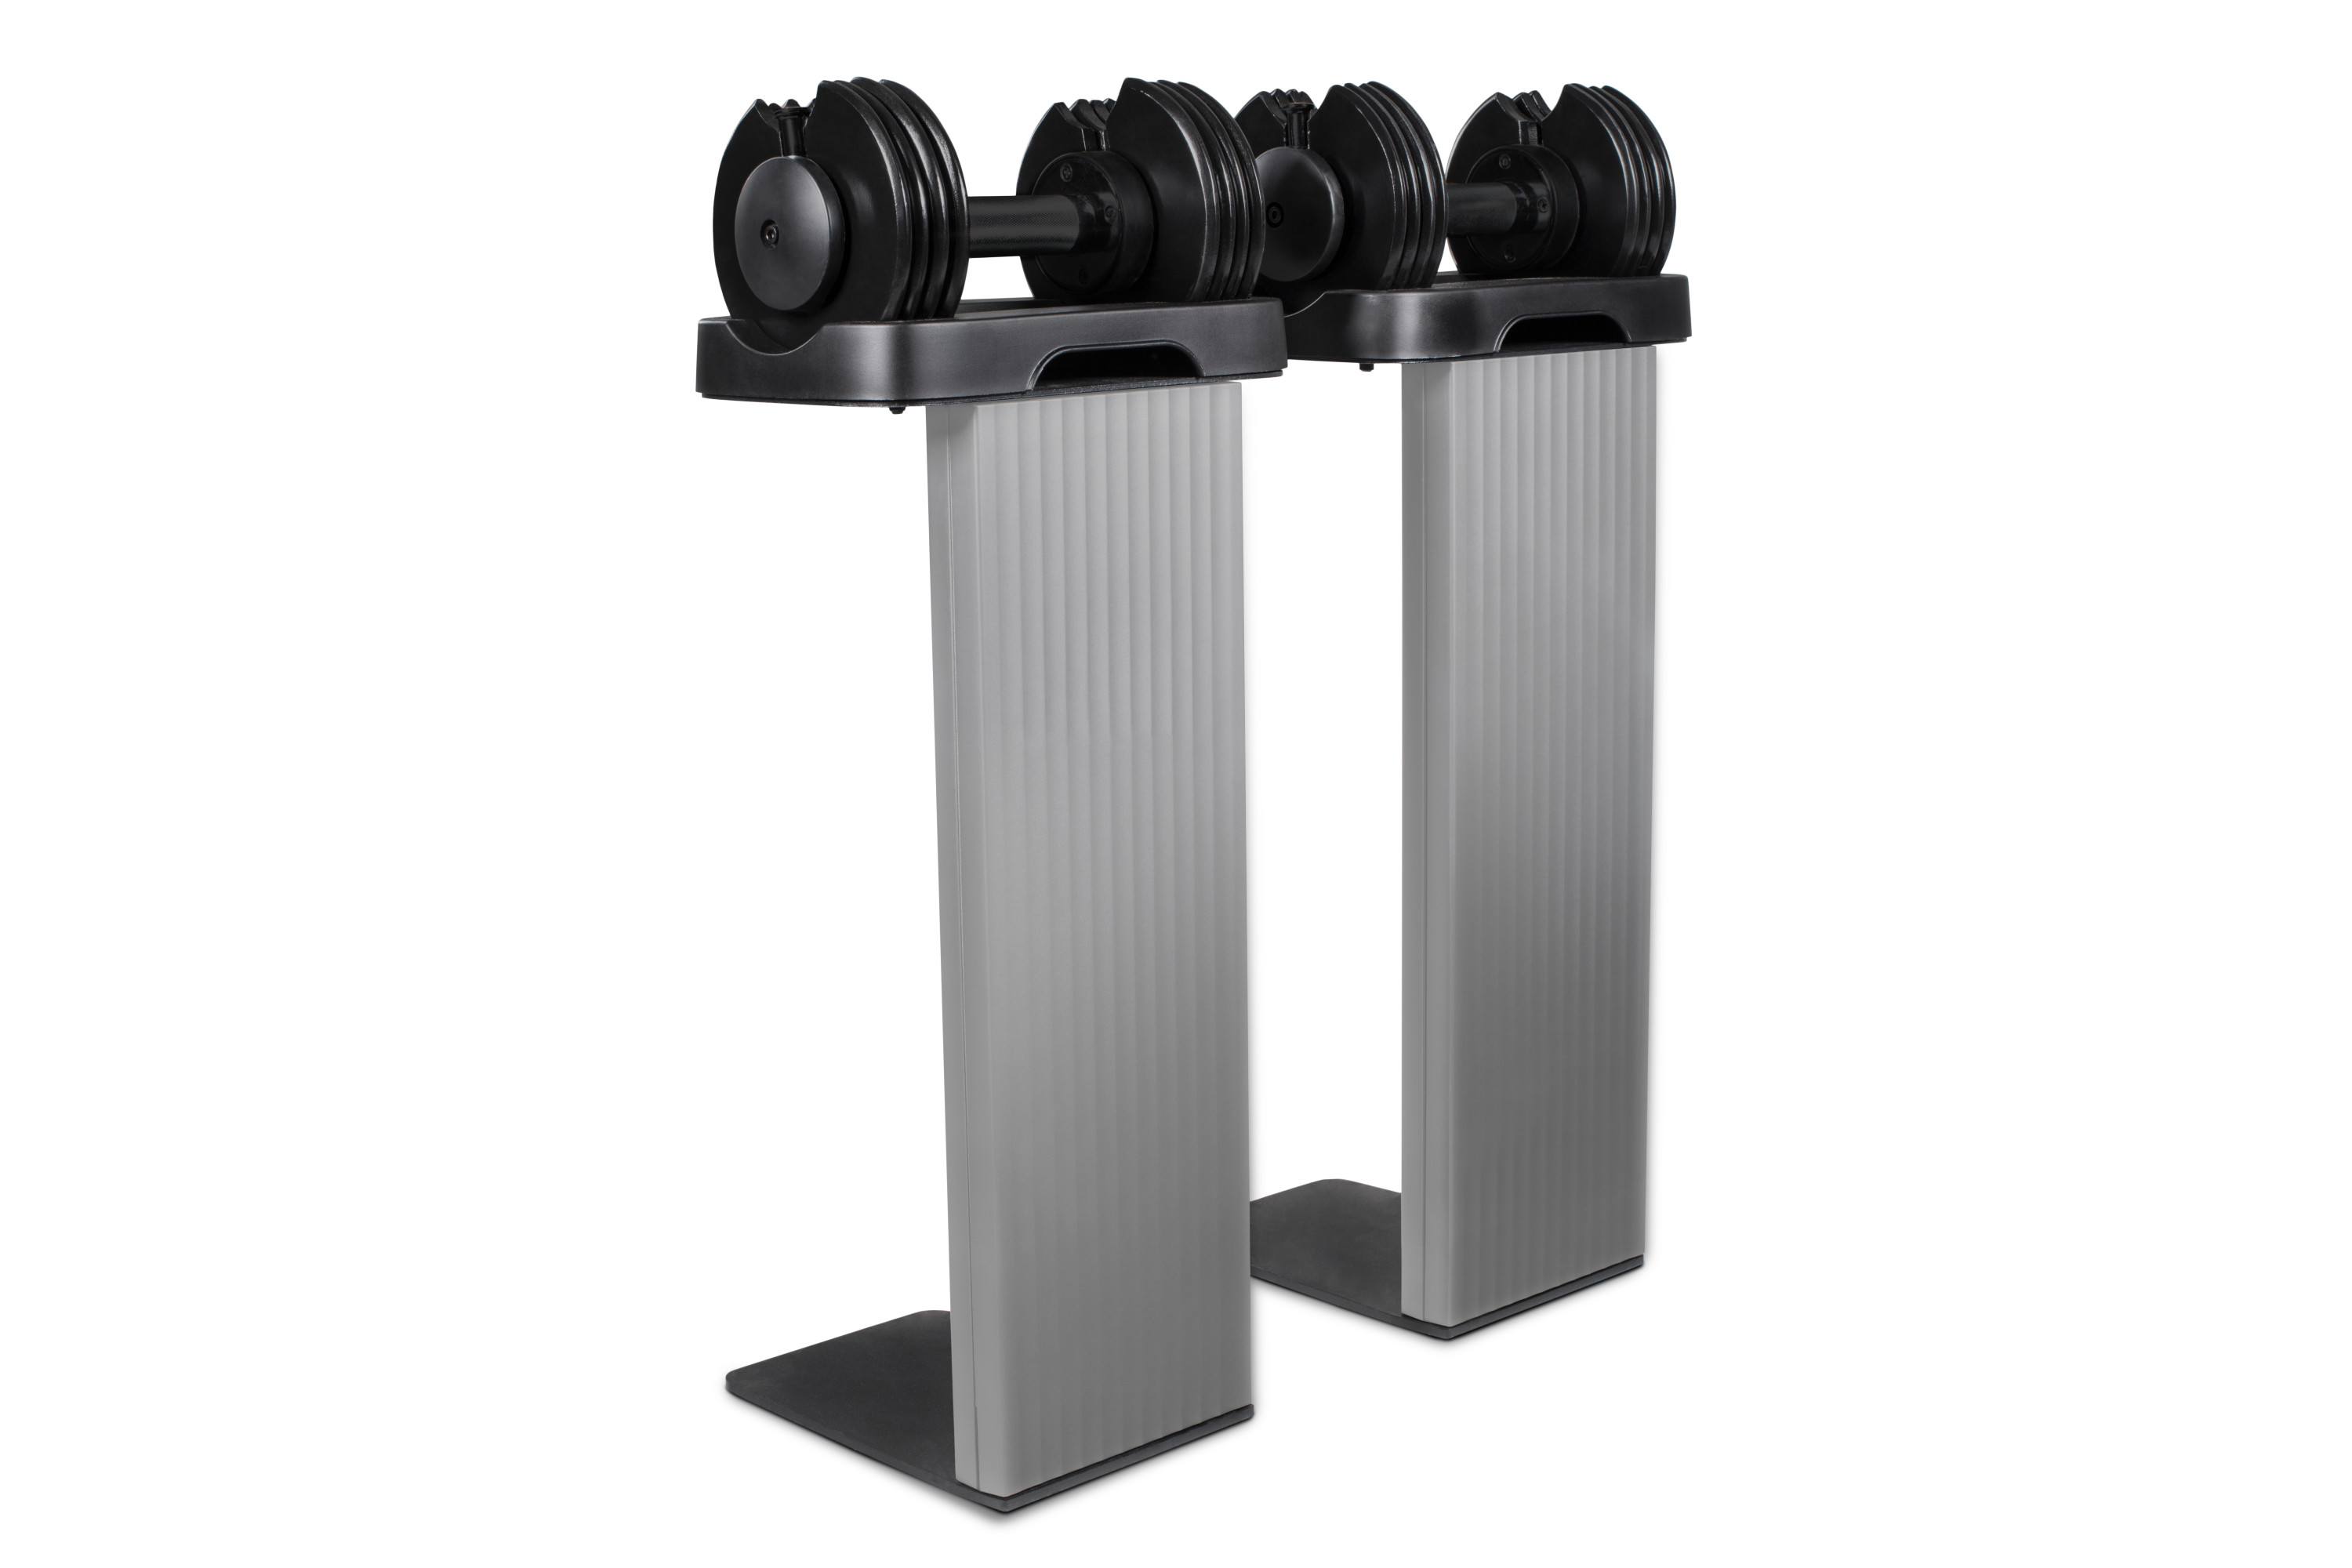 NordicTrack 12.5 lb. Adjustable Dumbbells with Weight Stands, Sold as Pair - image 3 of 10